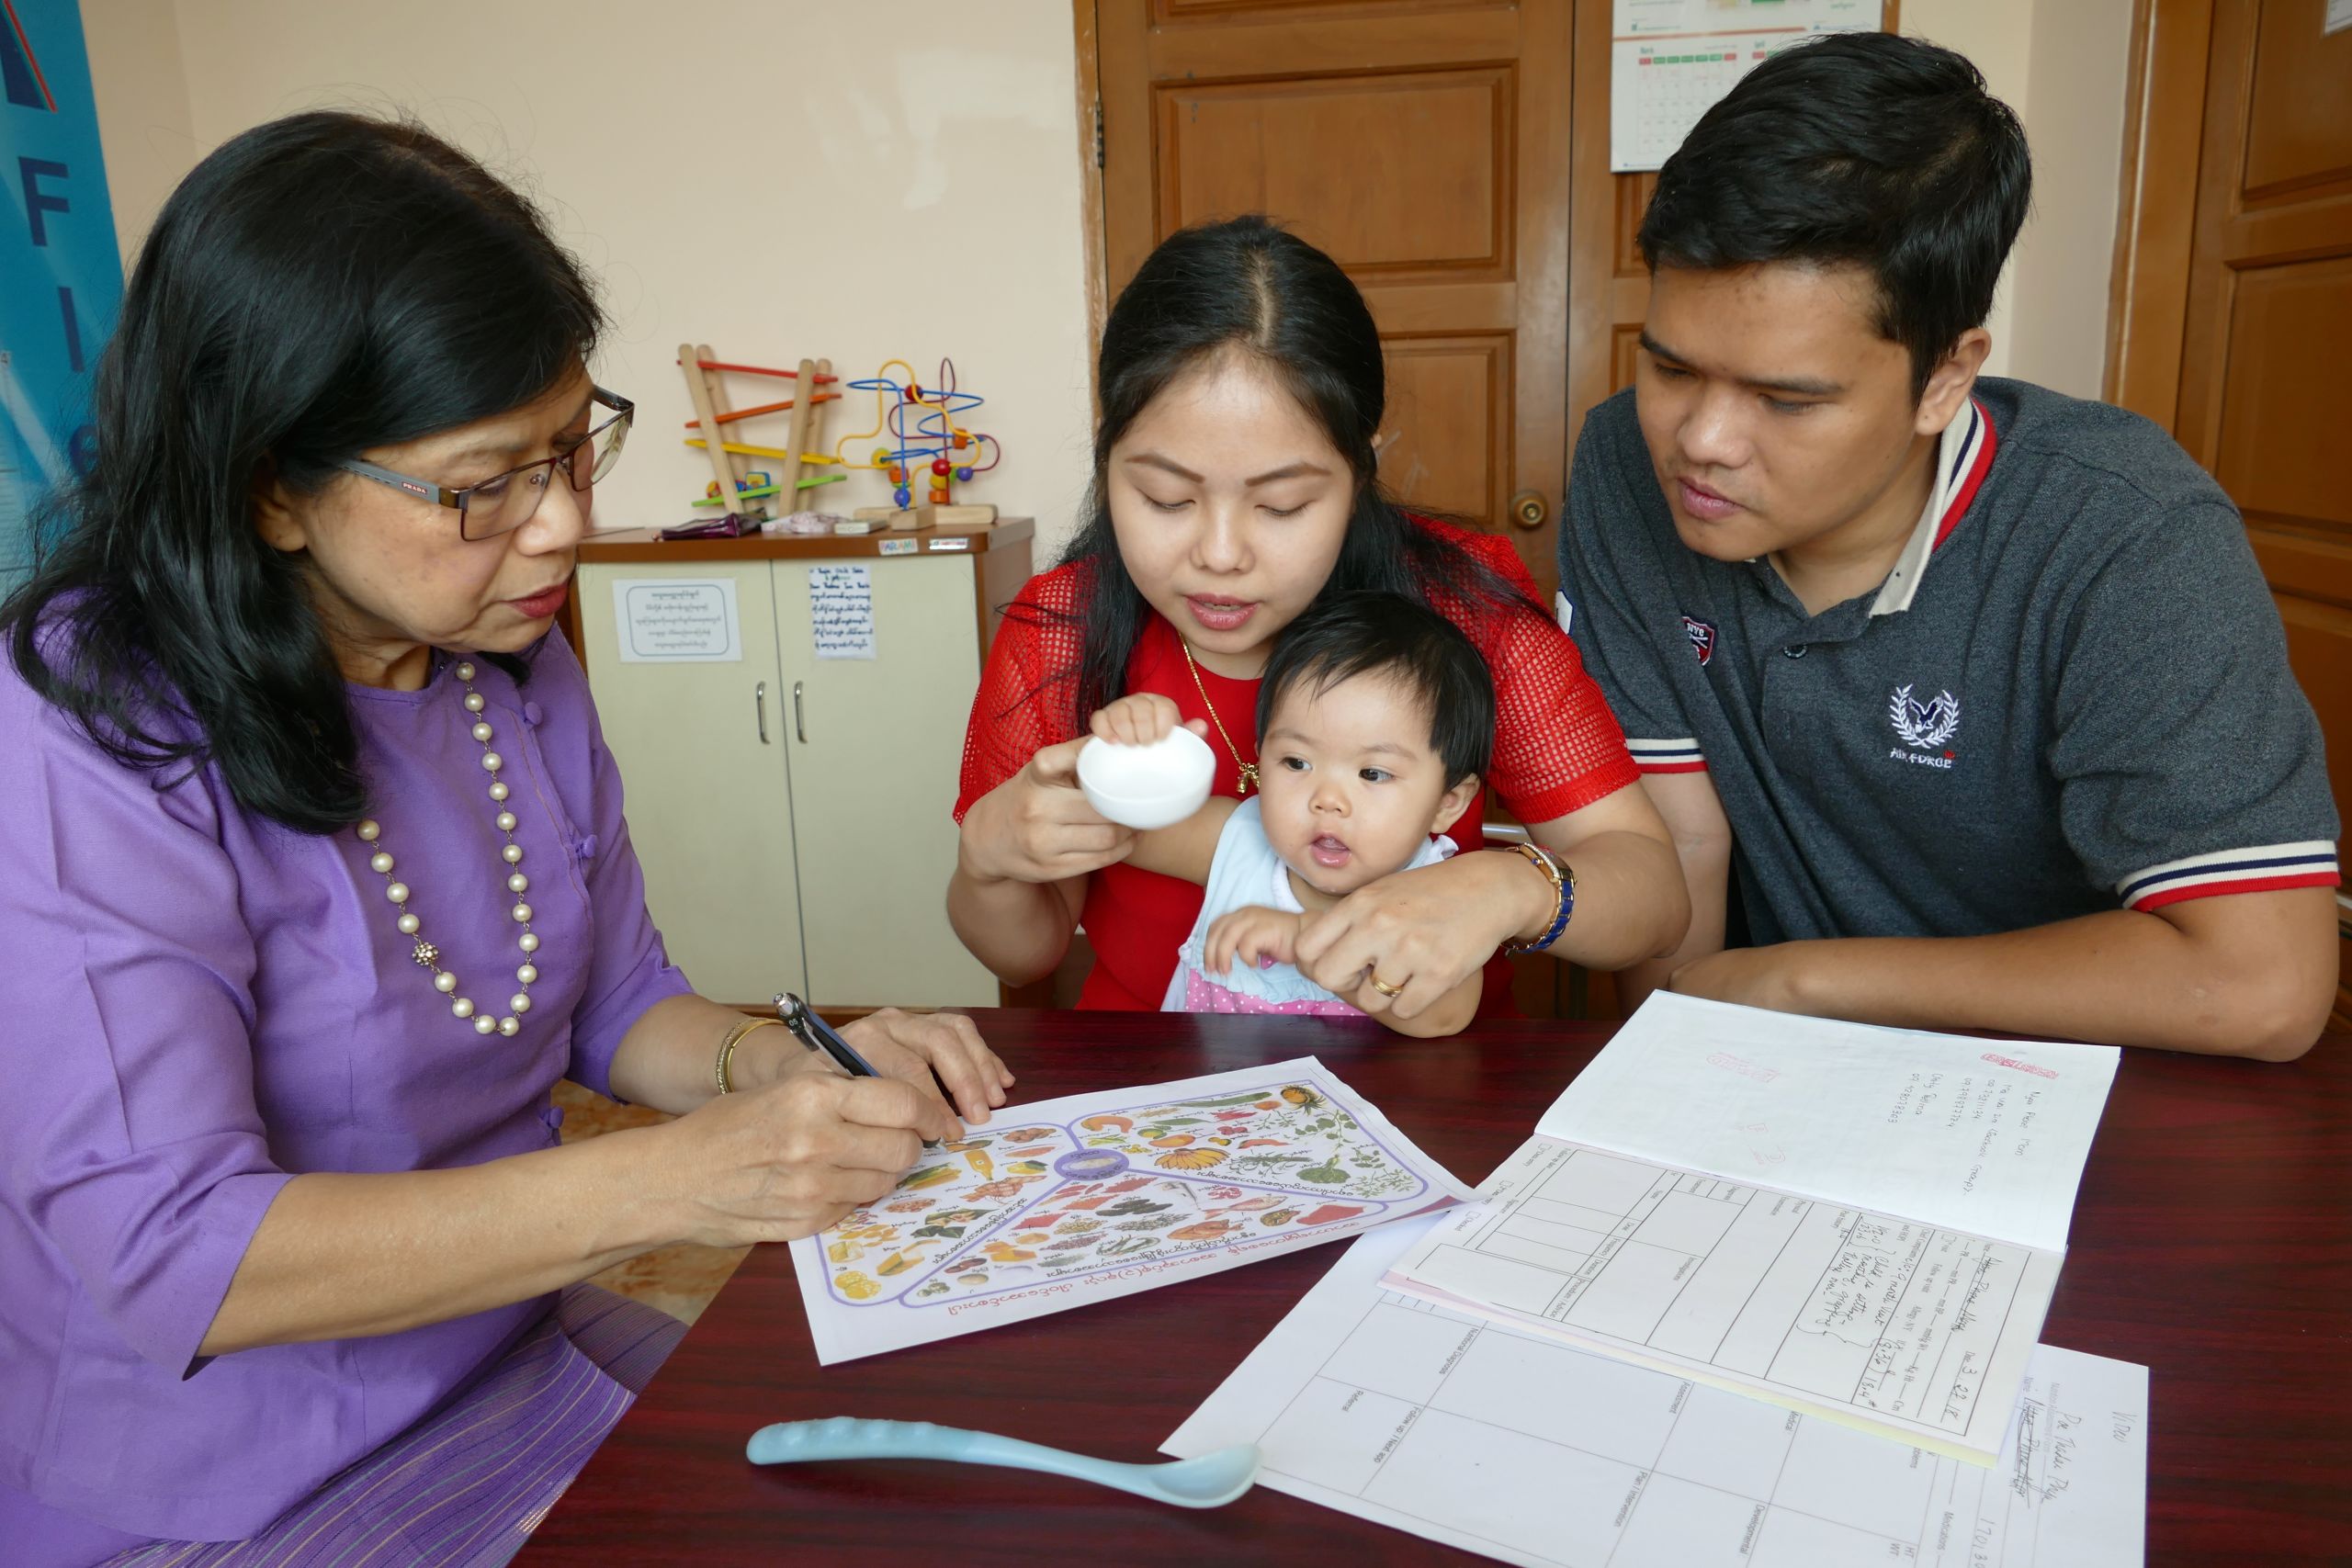 Parami General Hospital in Yangon. Nutritionist Thelma Tun Thein talks to a family about introducing diverse complementary foods for their 9-month old daughter.